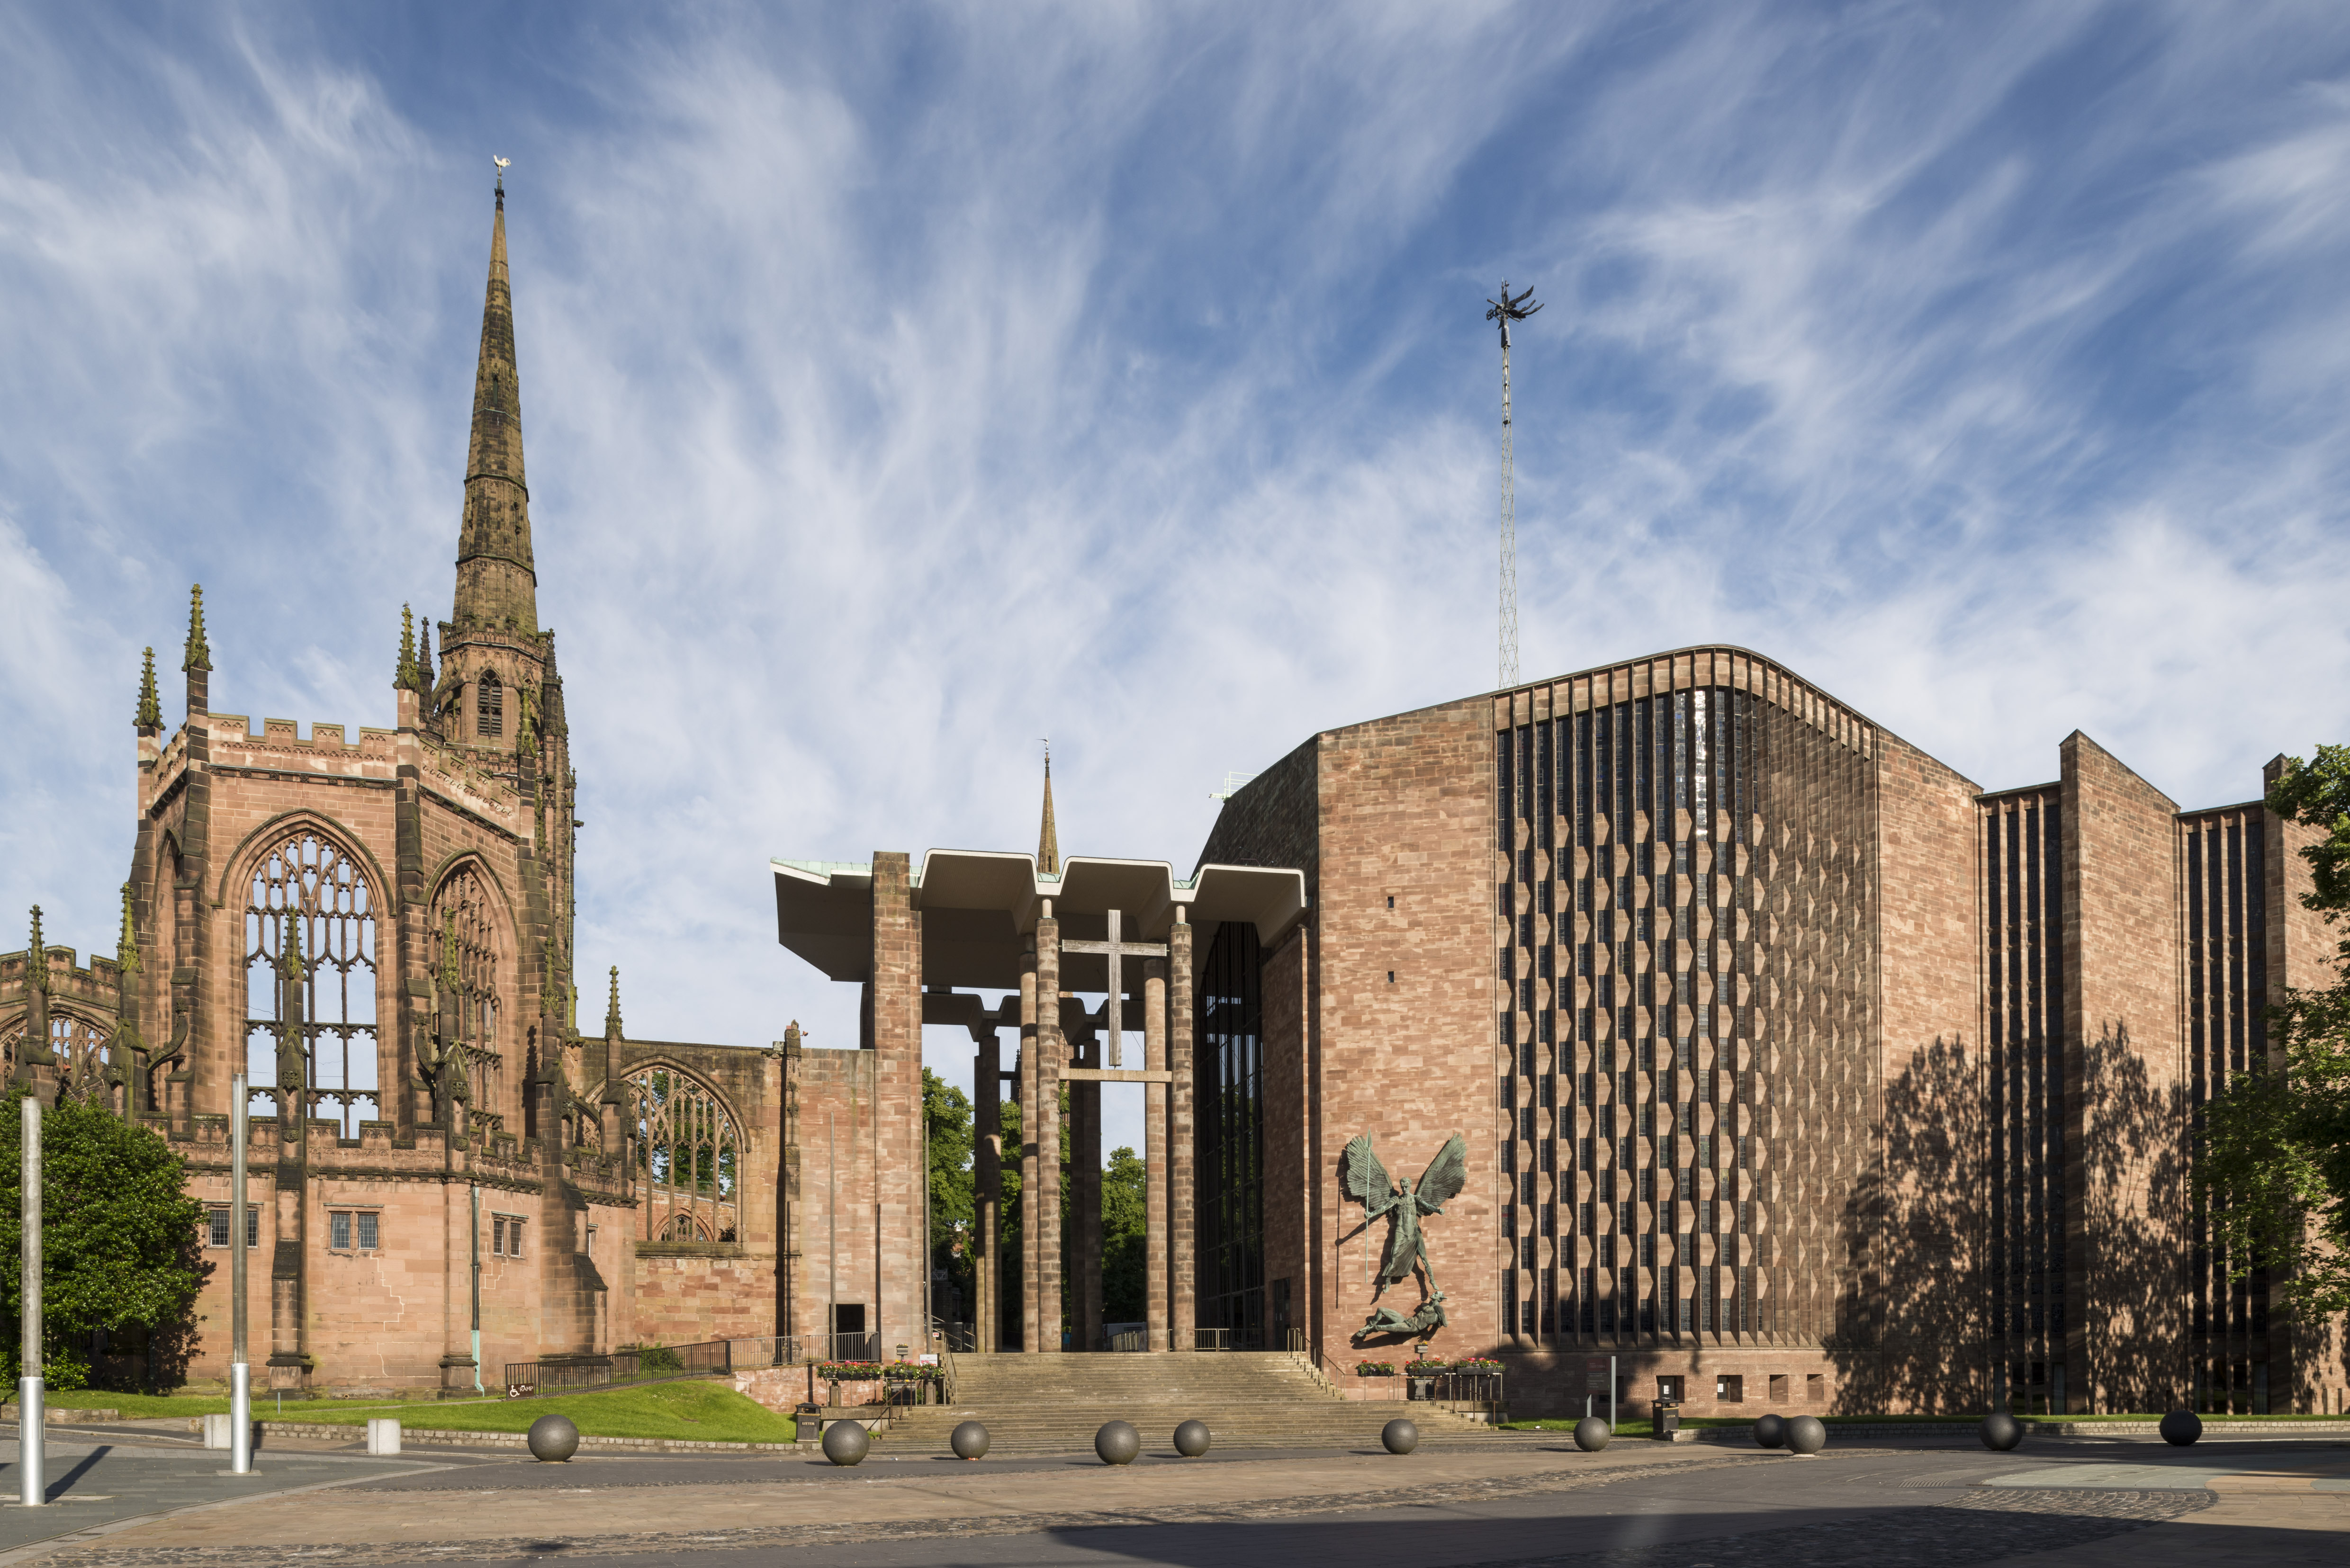 New Coventry Cathedral. Grade I listed in 1988 (Basil Spence & Partners, 1951−62) © Historic England